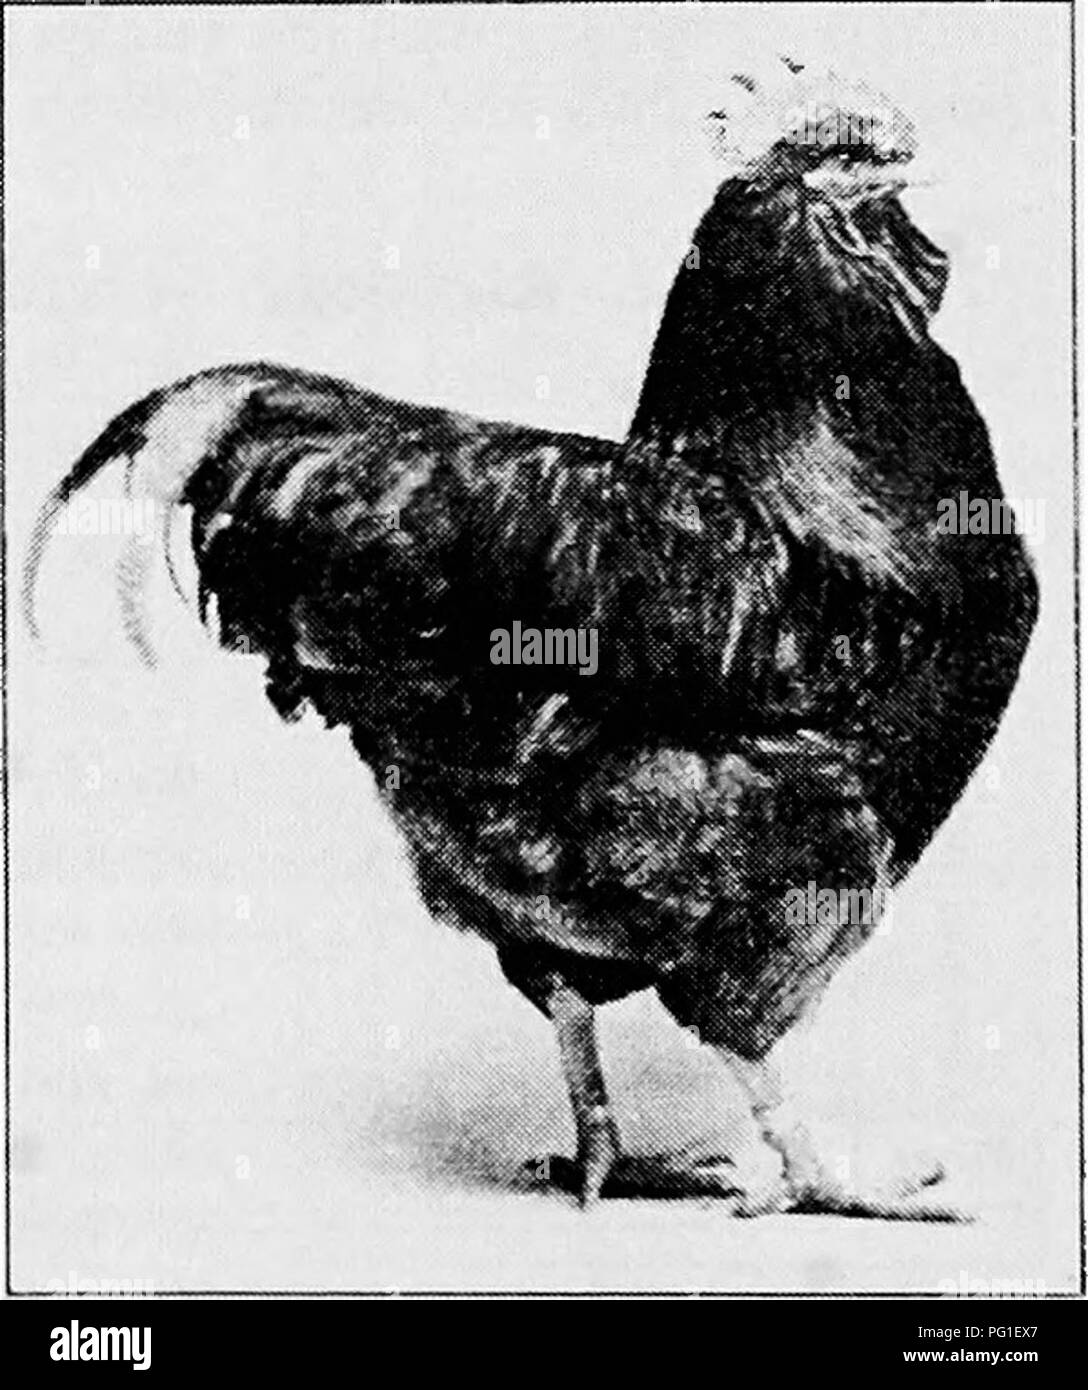 . Principles and practice of poultry culture . Poultry. Fig. 438. Single-Combed Buff Orpington pullet Typically the differences in shape of body between these breeds are as fol- lows : The Rhode Island Red, compared with the Wyandotte (which has the same weights, except for the pullet), has a long body, described as &quot; oblong &quot; ; the Wyandotte, a chunky, &quot; blocky&quot; body. The Buckeye tends toward the Indian Game rather than the oblong Rhode Island Red shape. Compared with the Wyandotte and Rhode Island Red, the Plymouth Rock is longer-bodied than the Wyandotte and heavier than Stock Photo